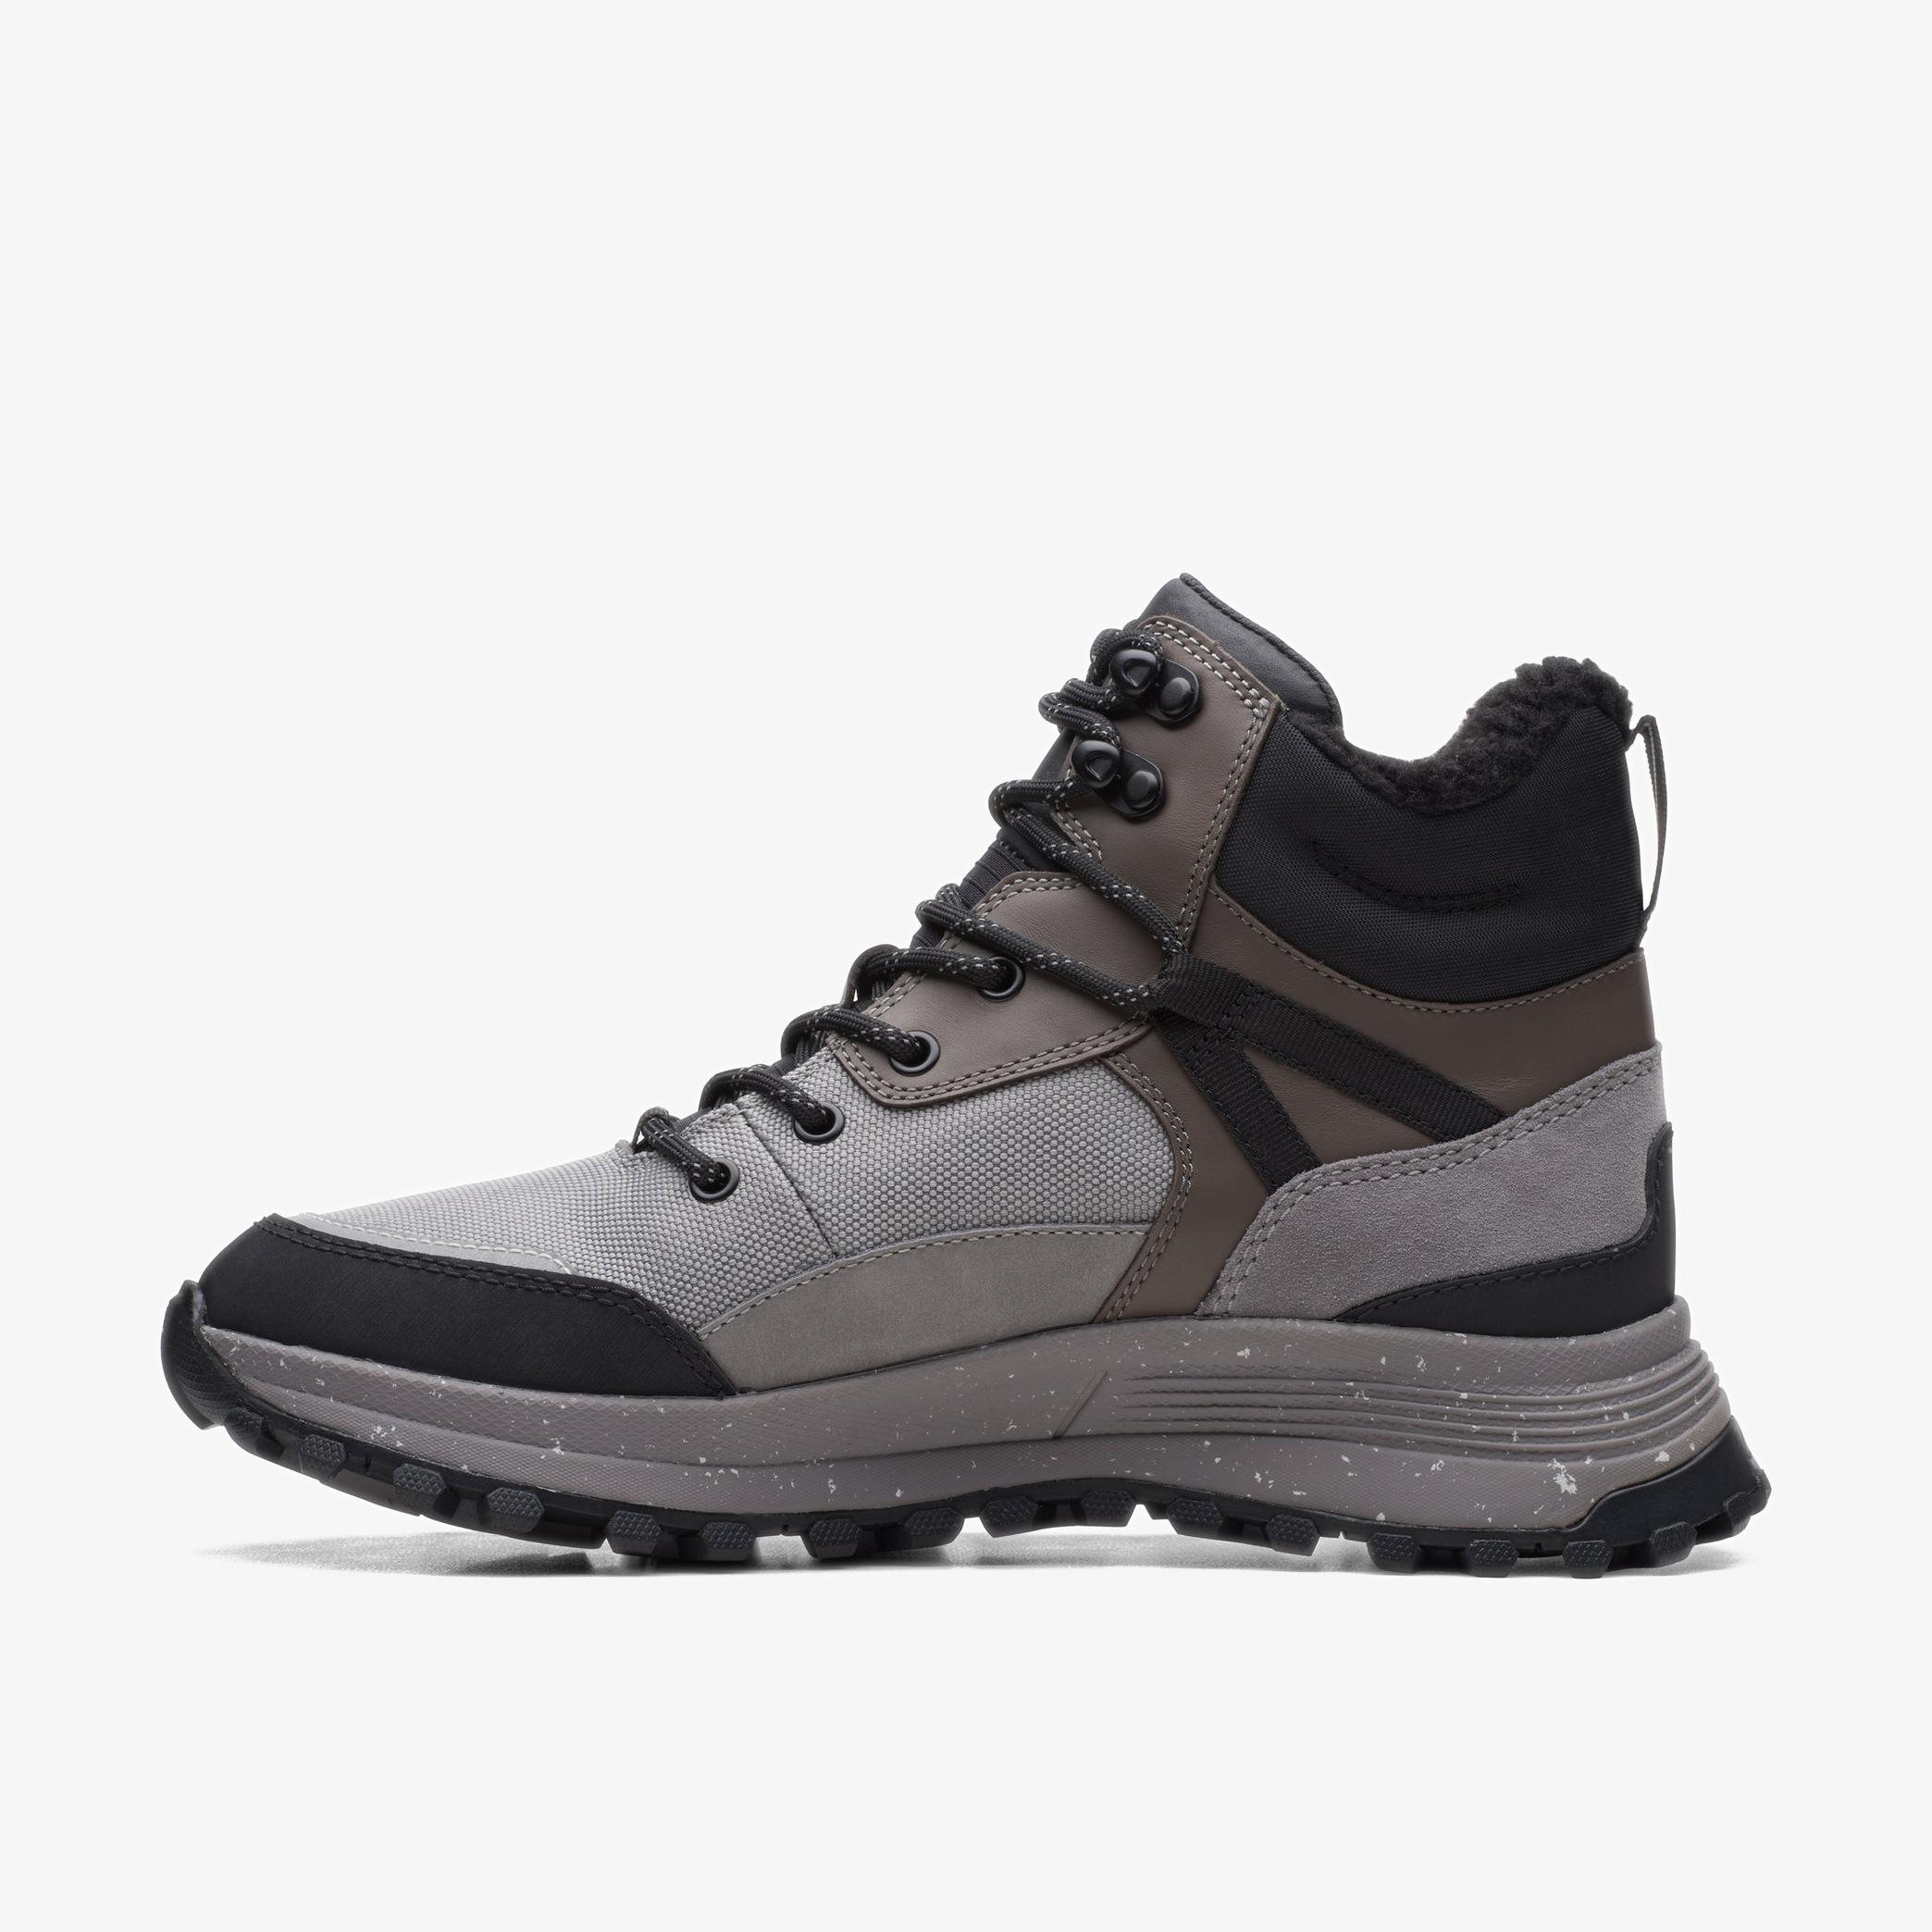 ATL Trek Sky GORE-TEX Grey Warmlined Leather Ankle Boots, view 2 of 6